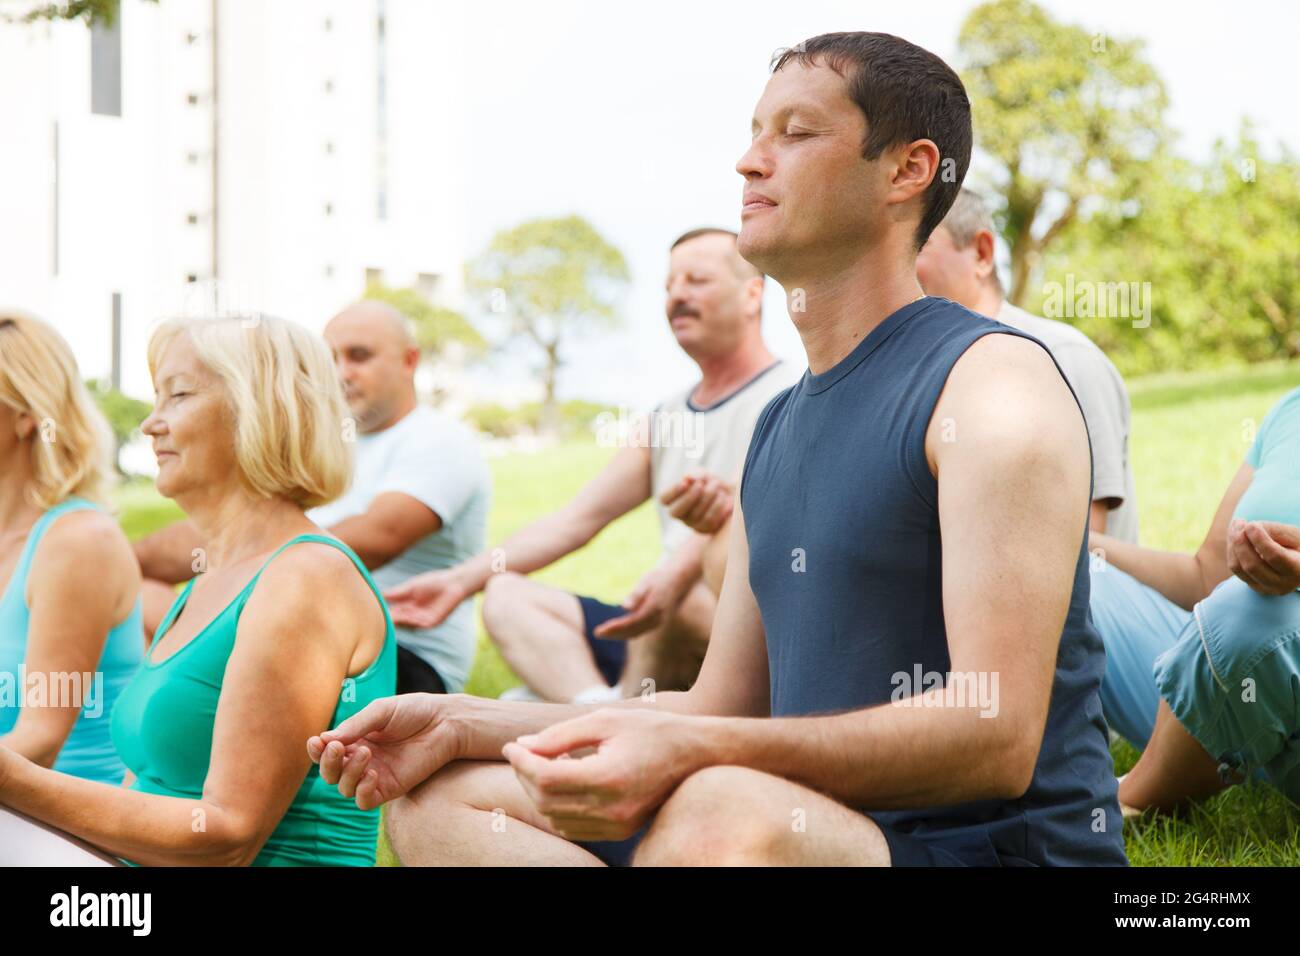 Group of People practicing yoga outside Stock Photo